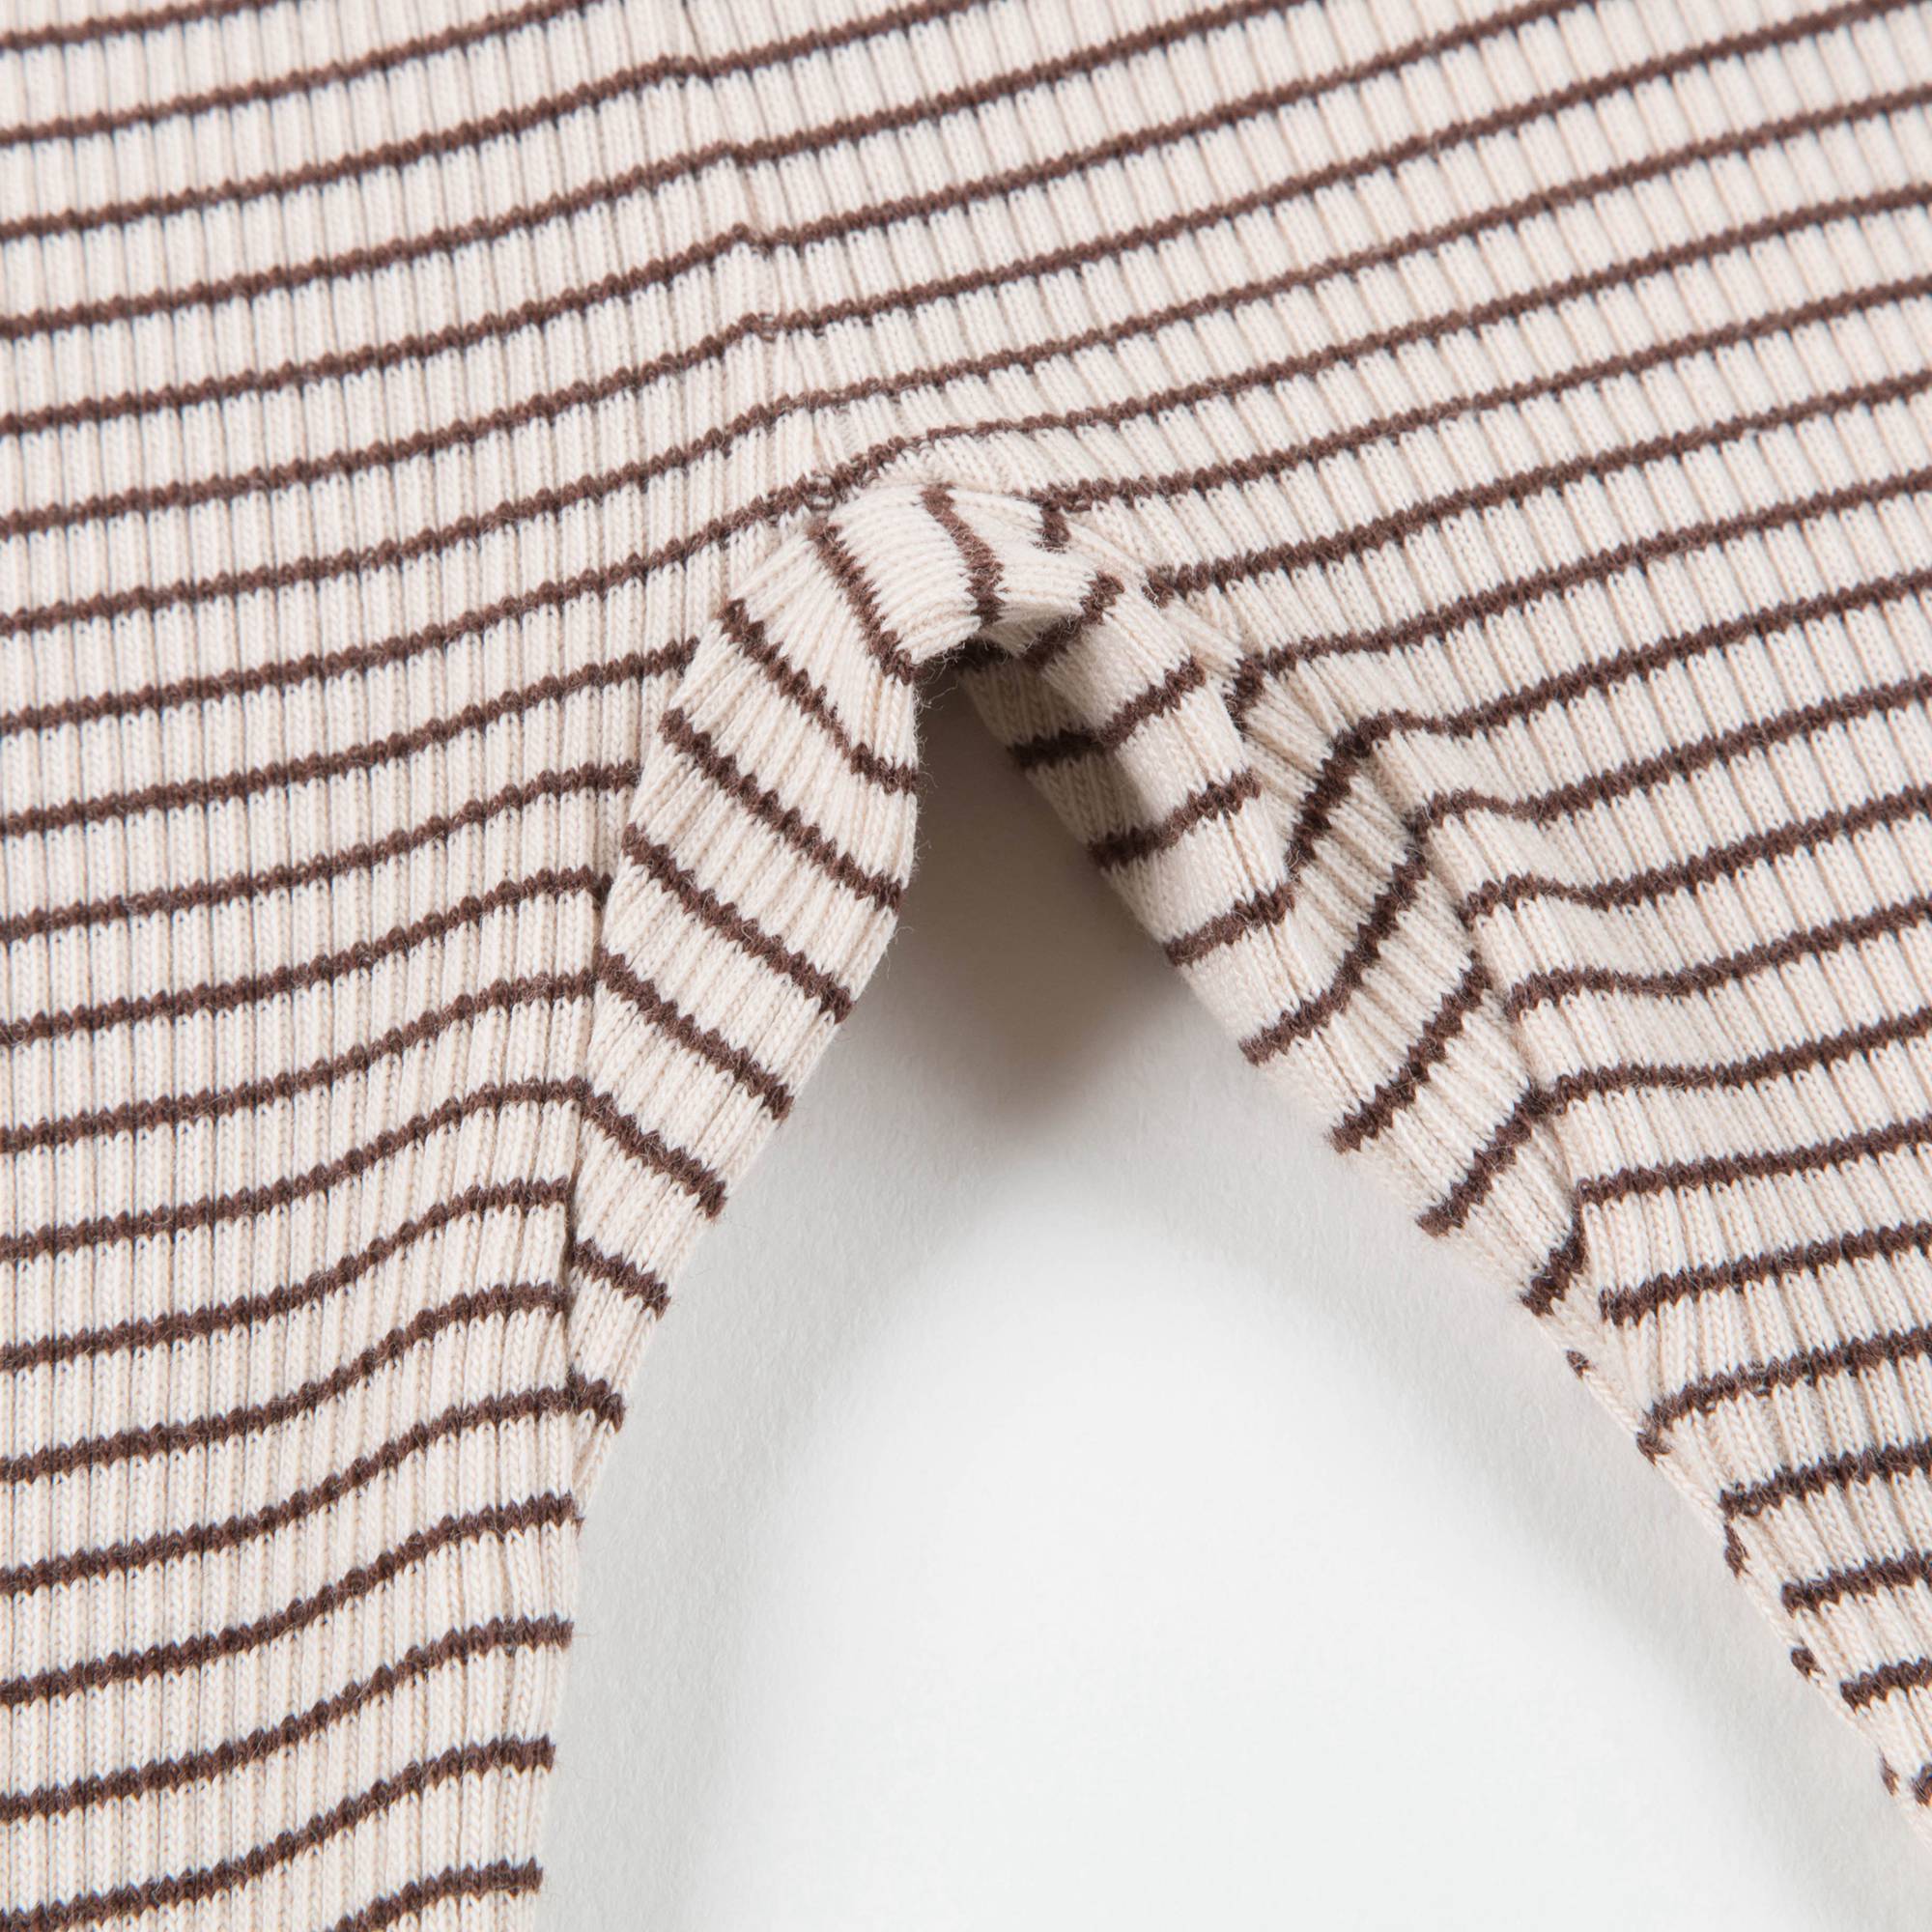 Baby Sand & Chocolate Stripe Cotton Jersey Trousers